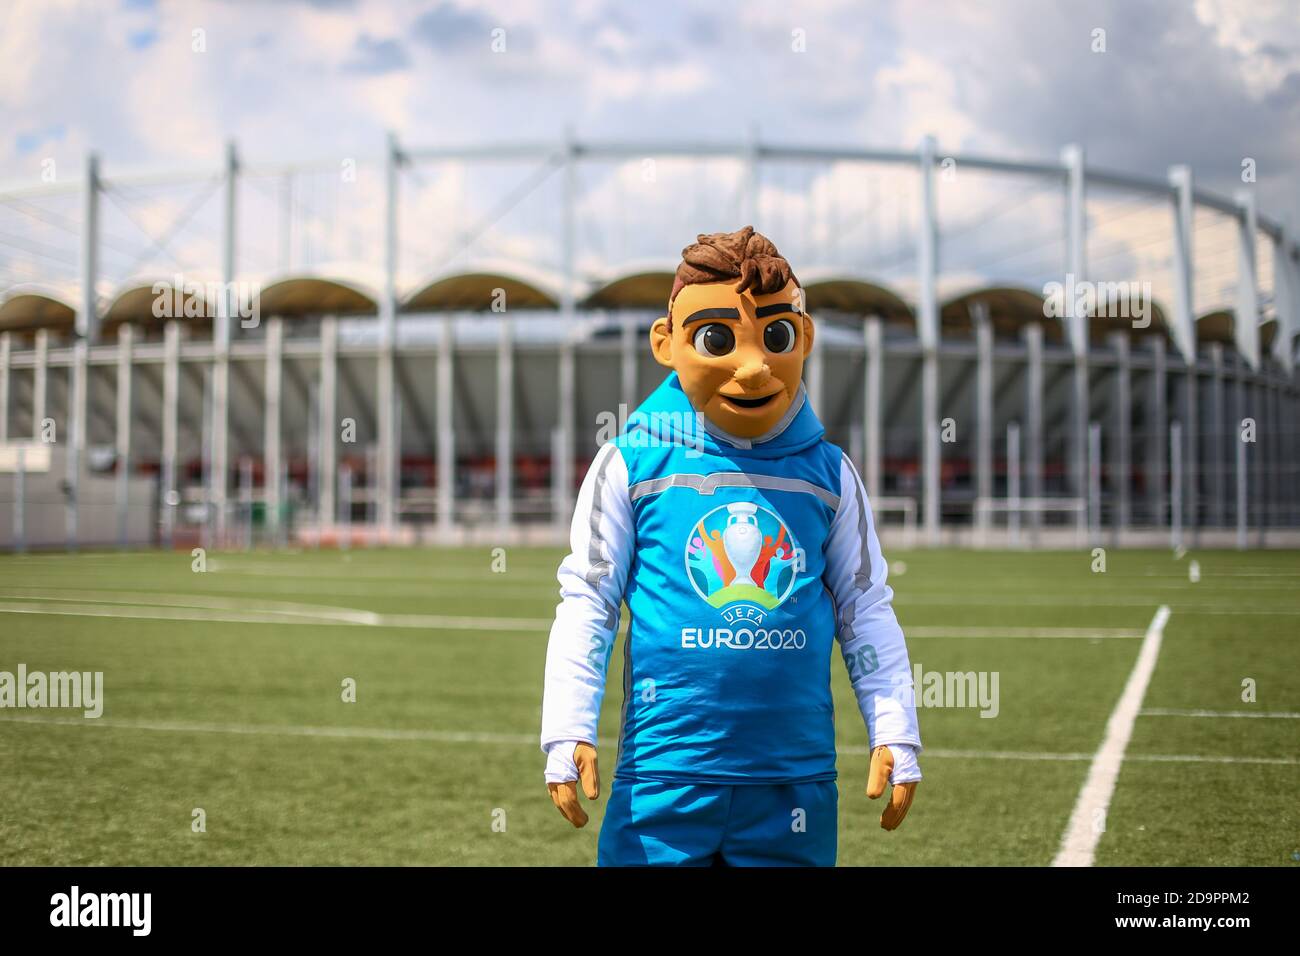 Bucharest, Romania - May 24, 2019: A person dressed as Skillzy, the official Euro 2020 soccer tournament mascot, at the National Arena Stadium. Stock Photo